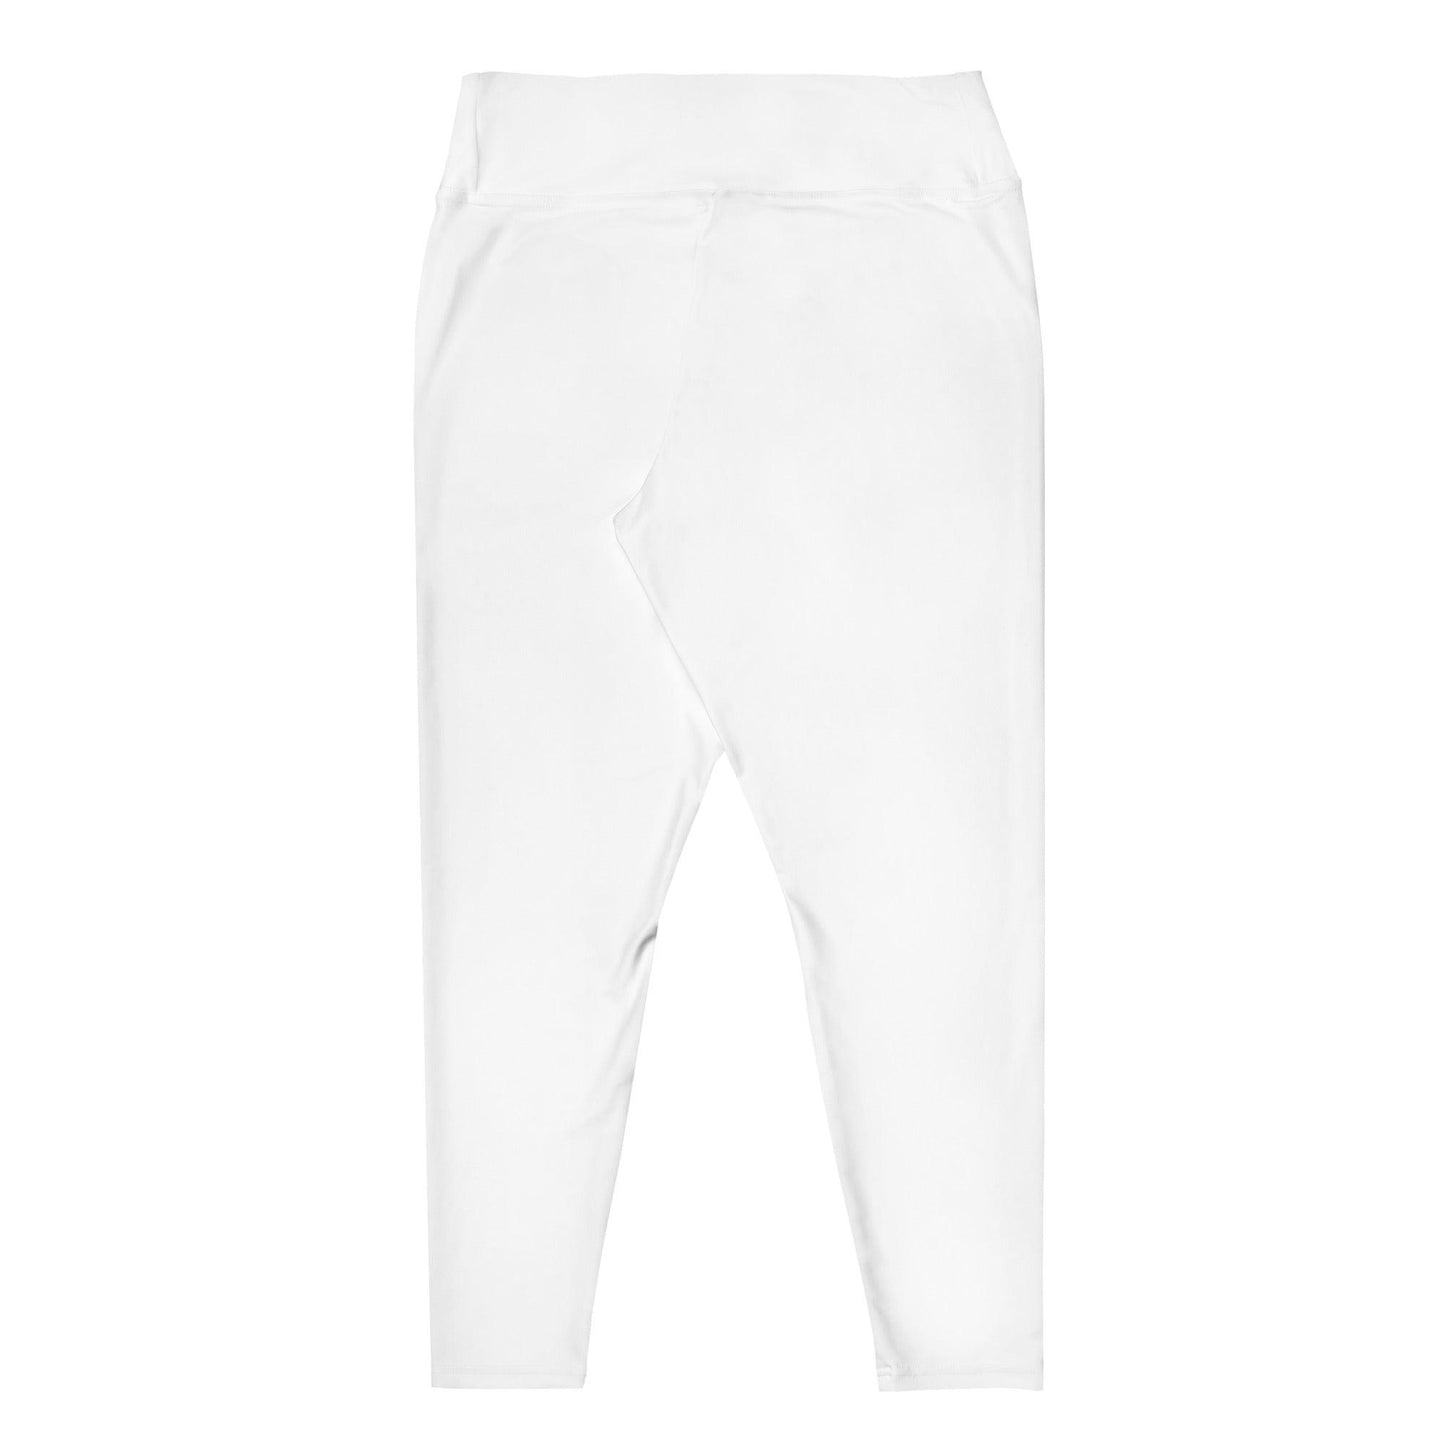 iSAW Womens White XL Leggings - iSAW Company